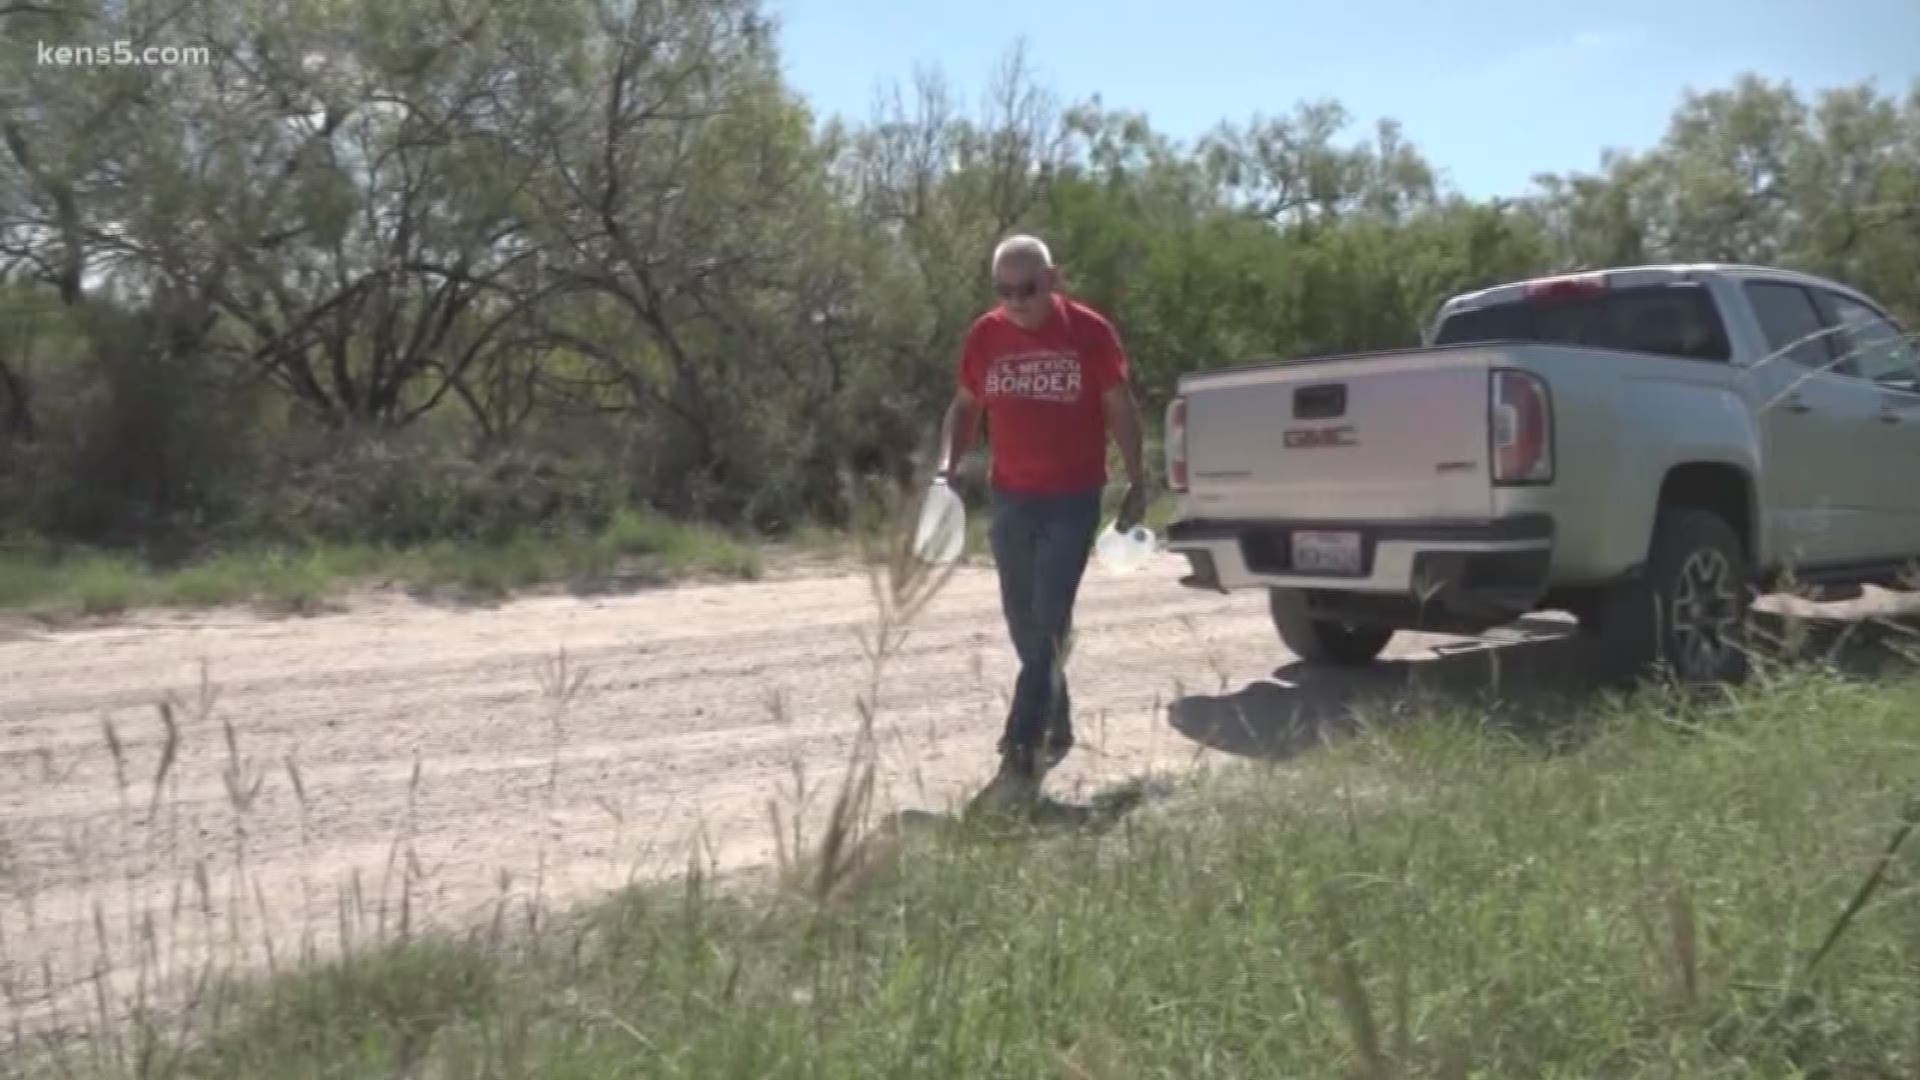 37 bodies and skeletal remains of immigrants have been found so far this year in the brush of Brooks County. Most are suspected of dying from dehydration.